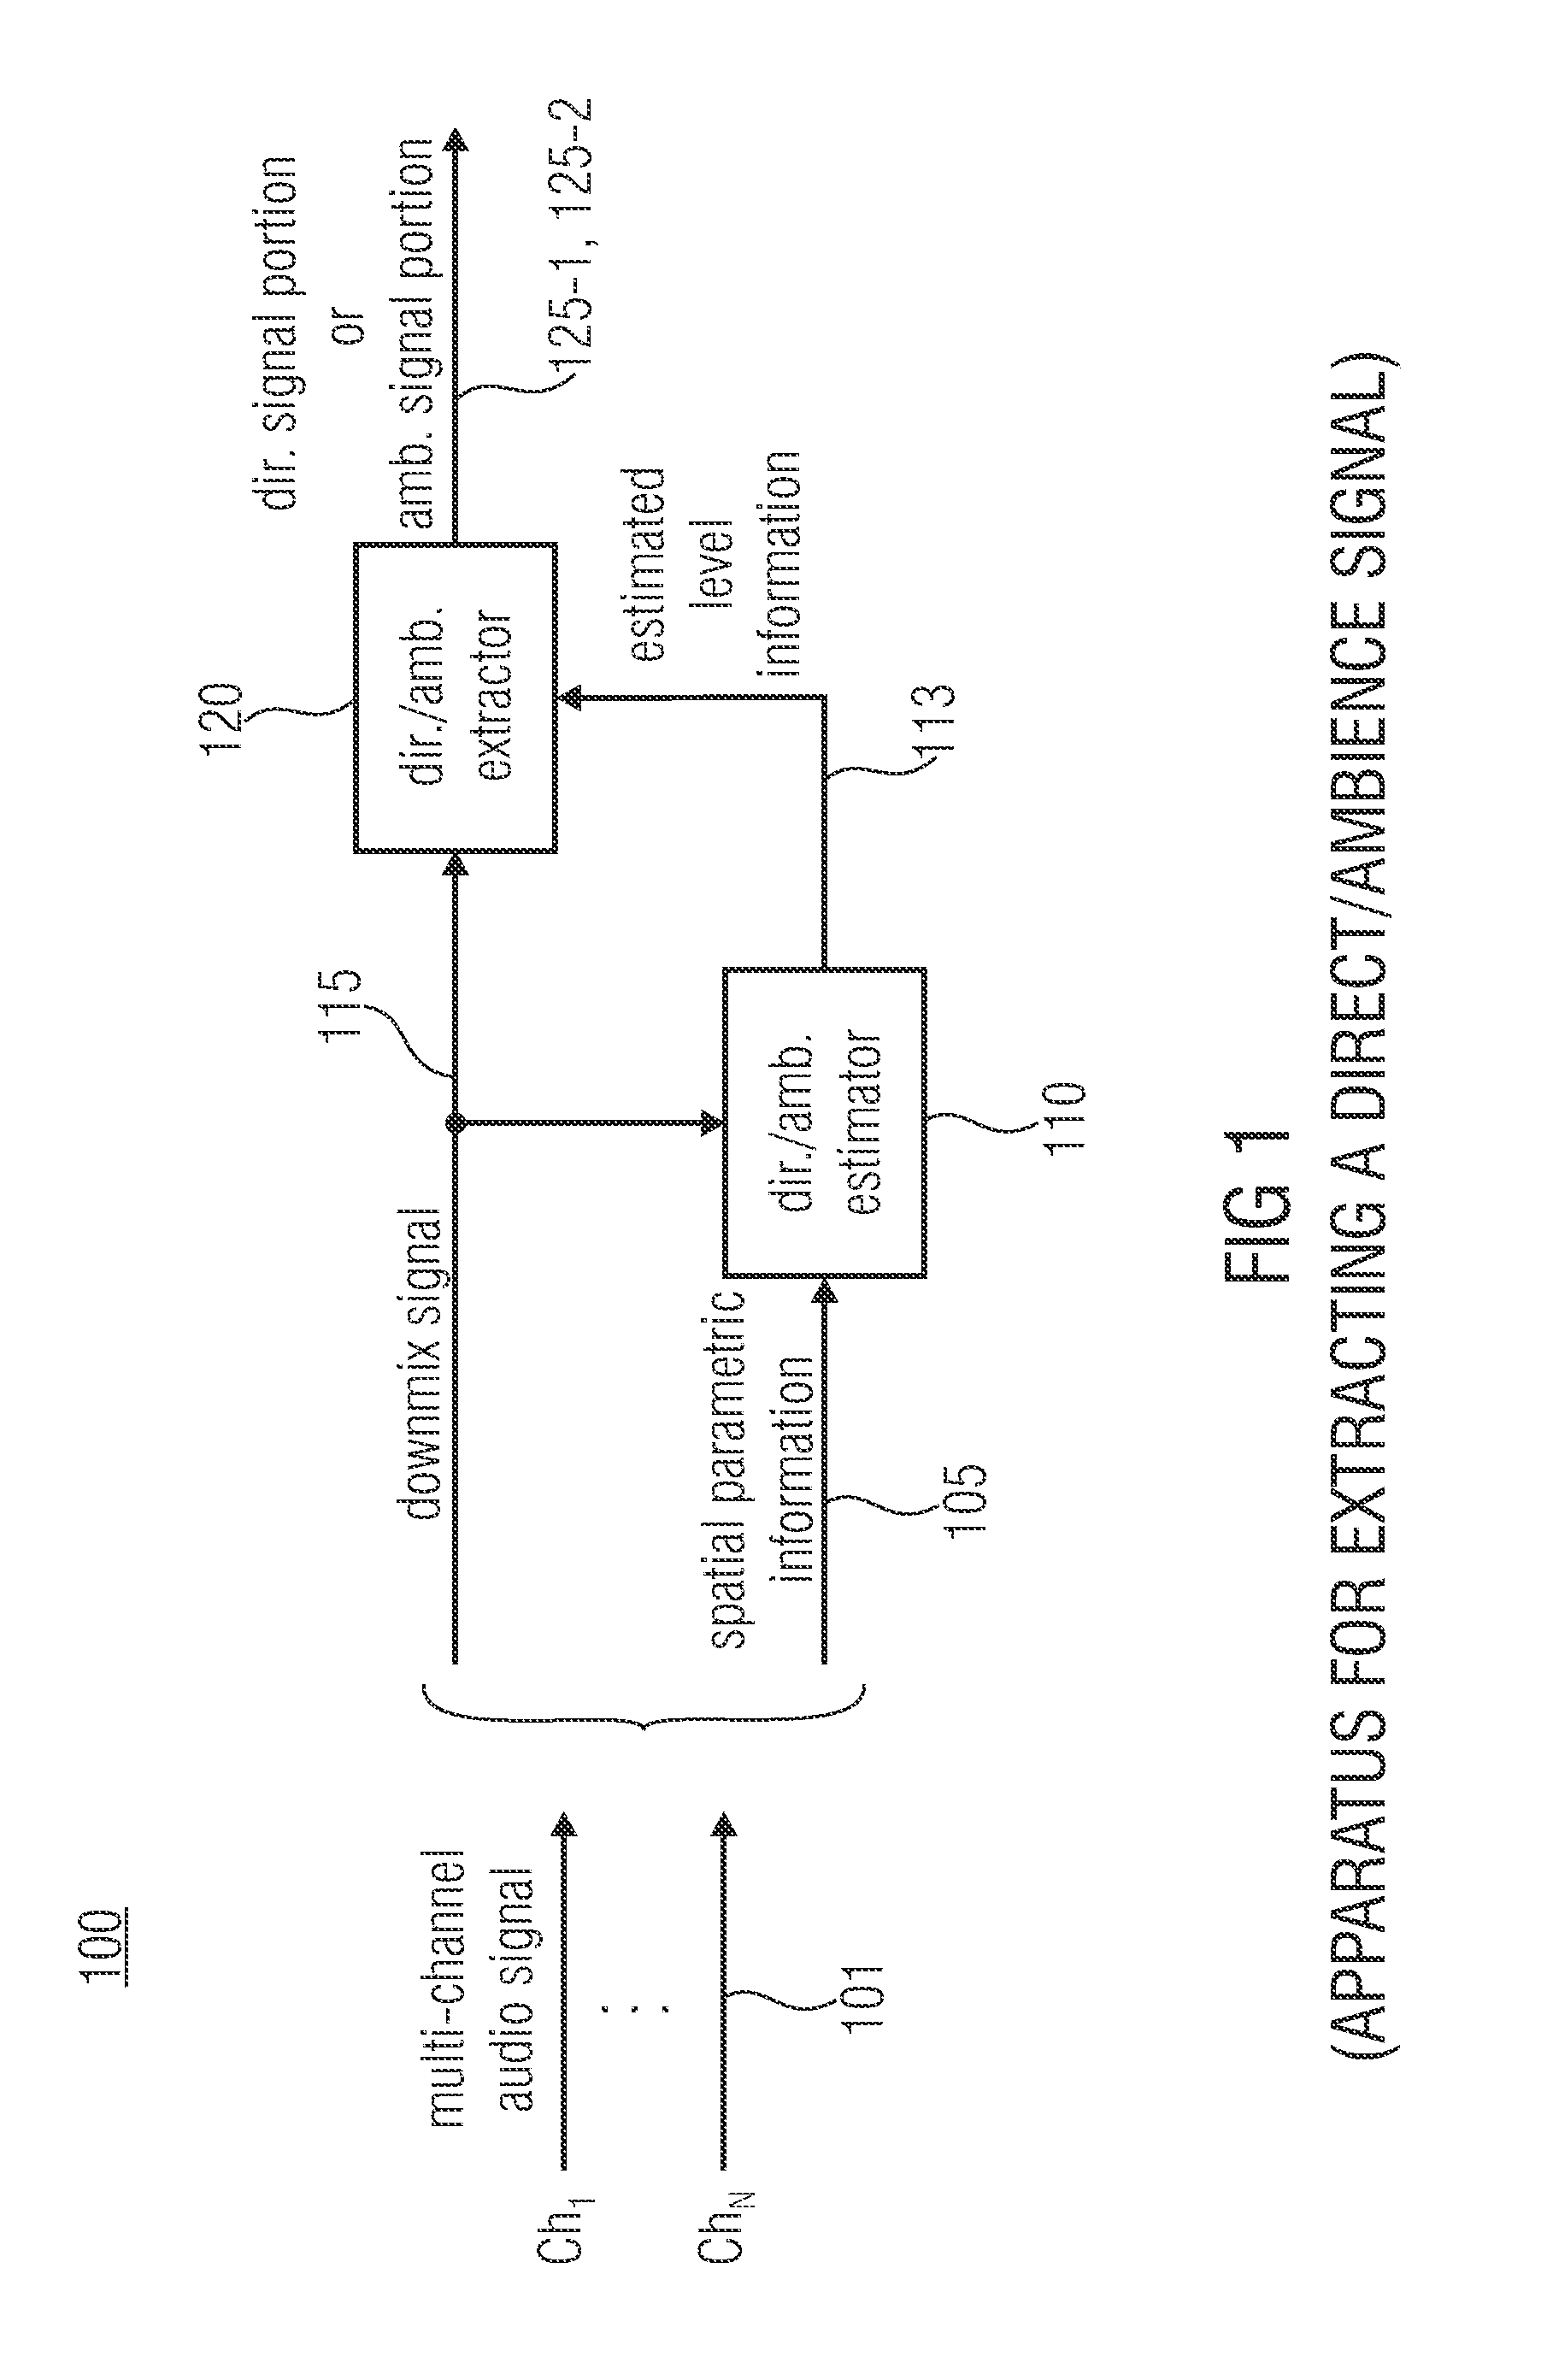 Apparatus and method for extracting a direct/ambience signal from a downmix signal and spatial parametric information